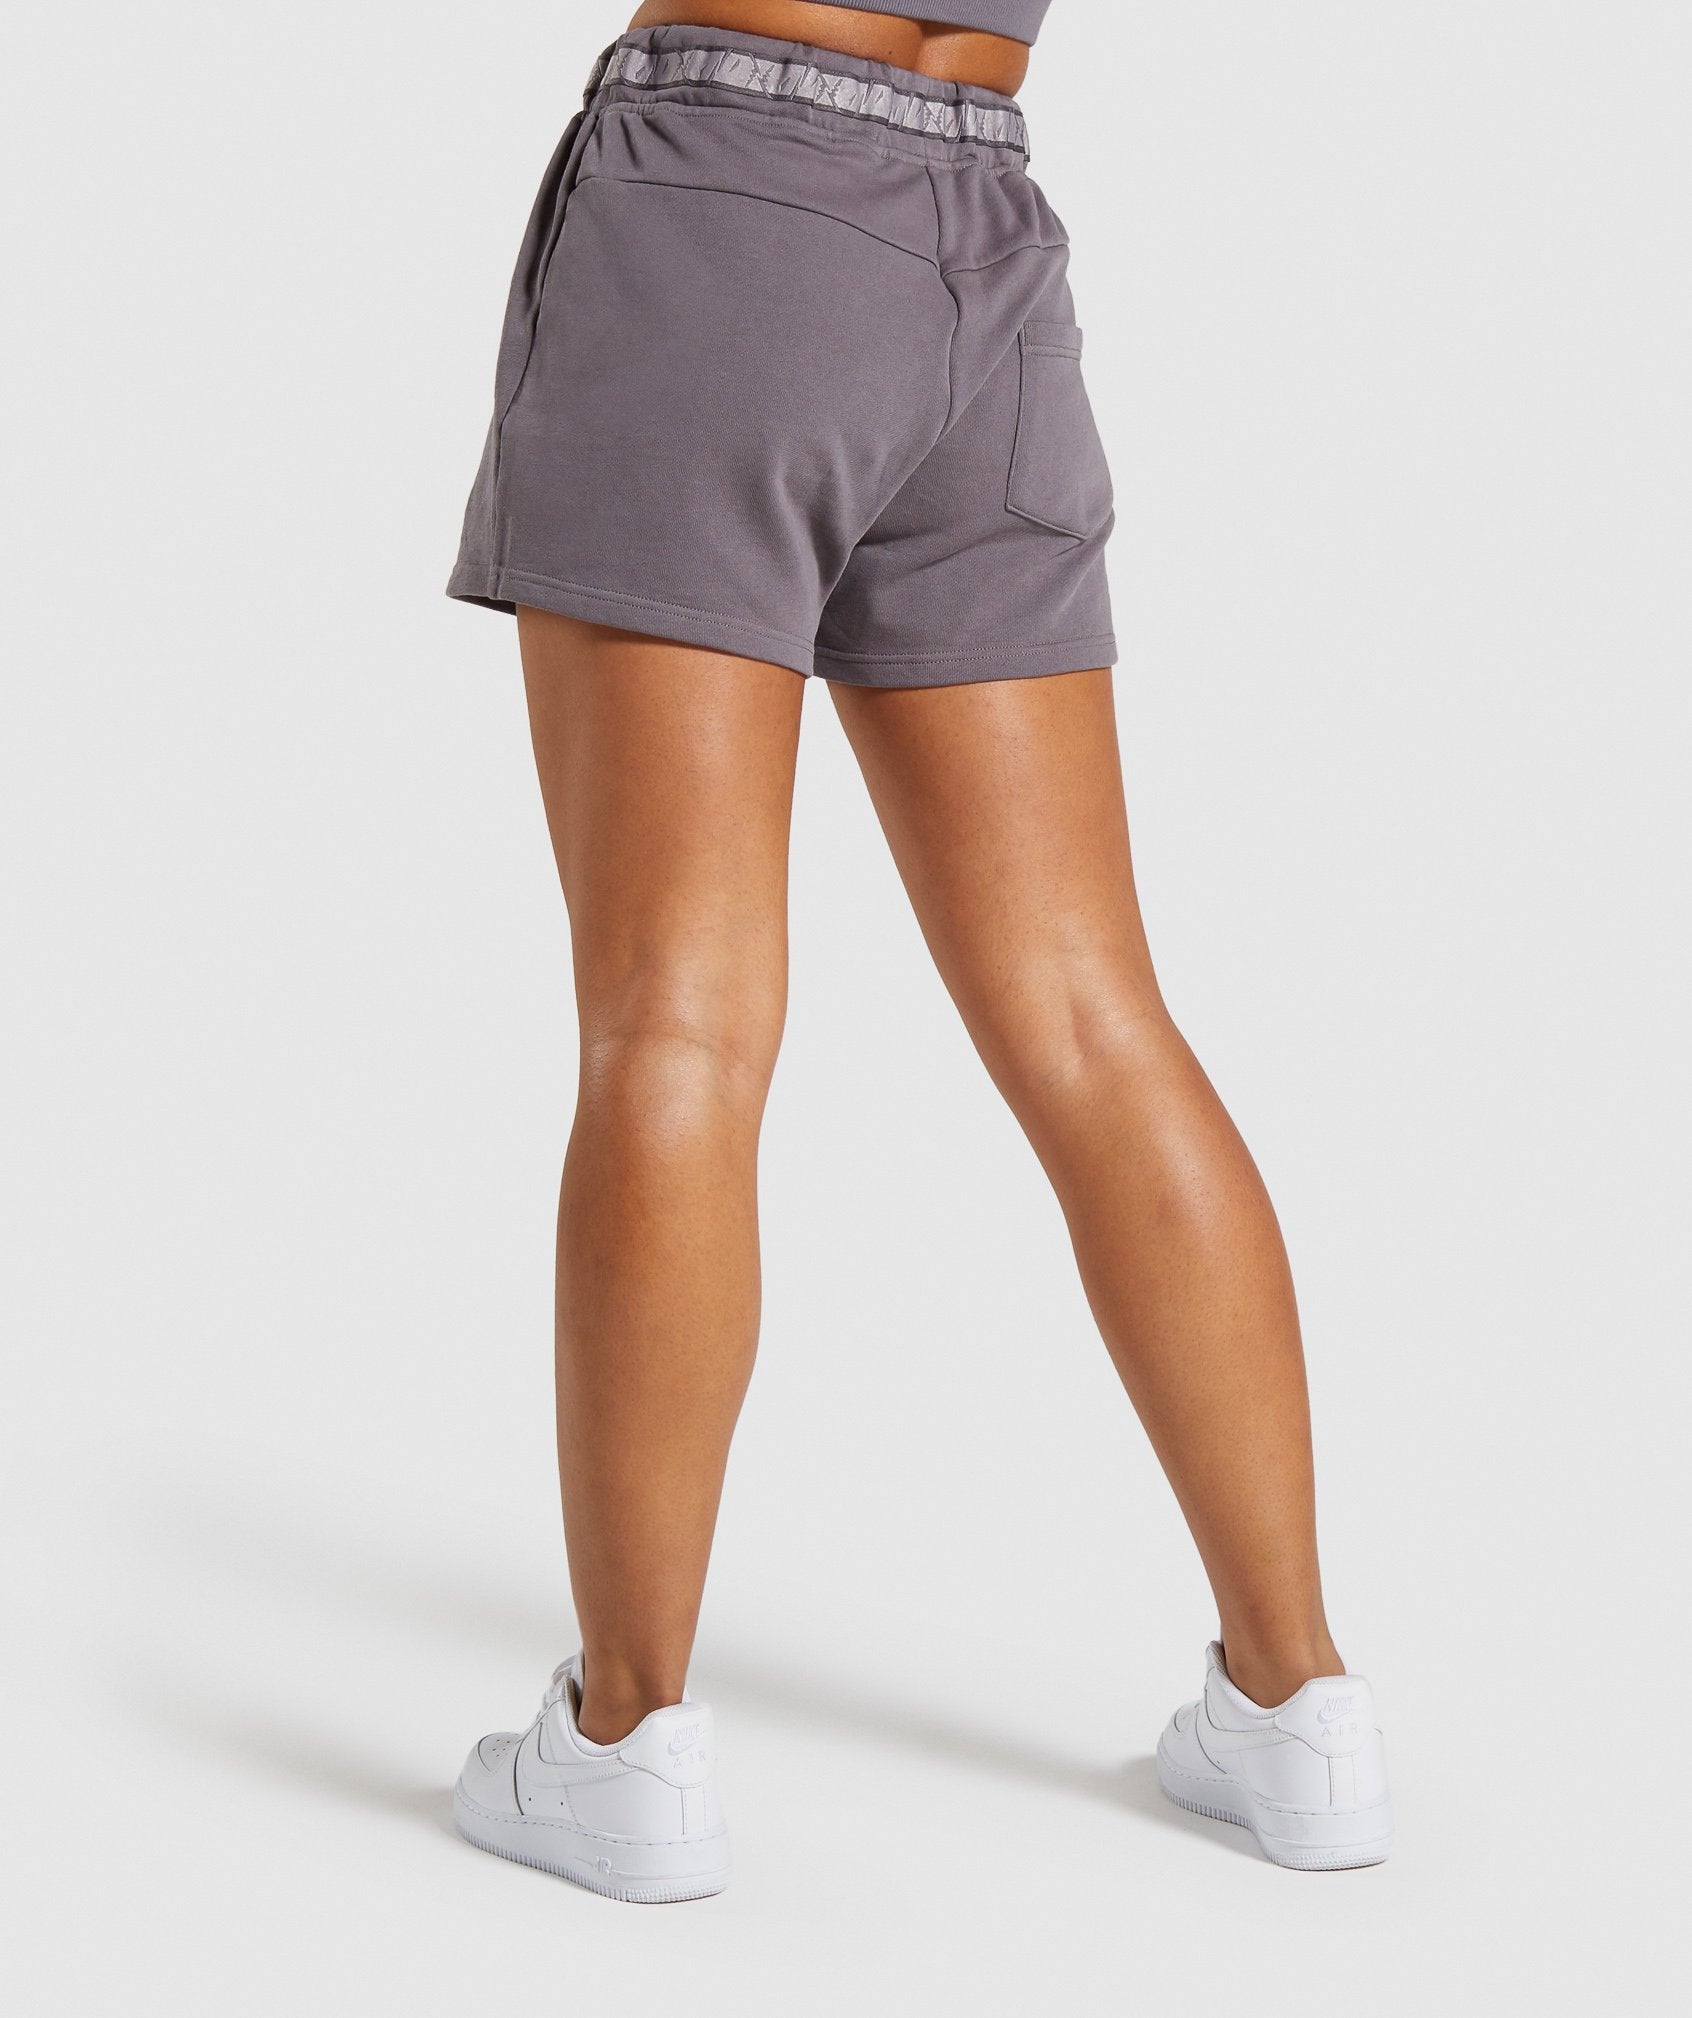 24/7 Shorts in Slate Lavender - view 2